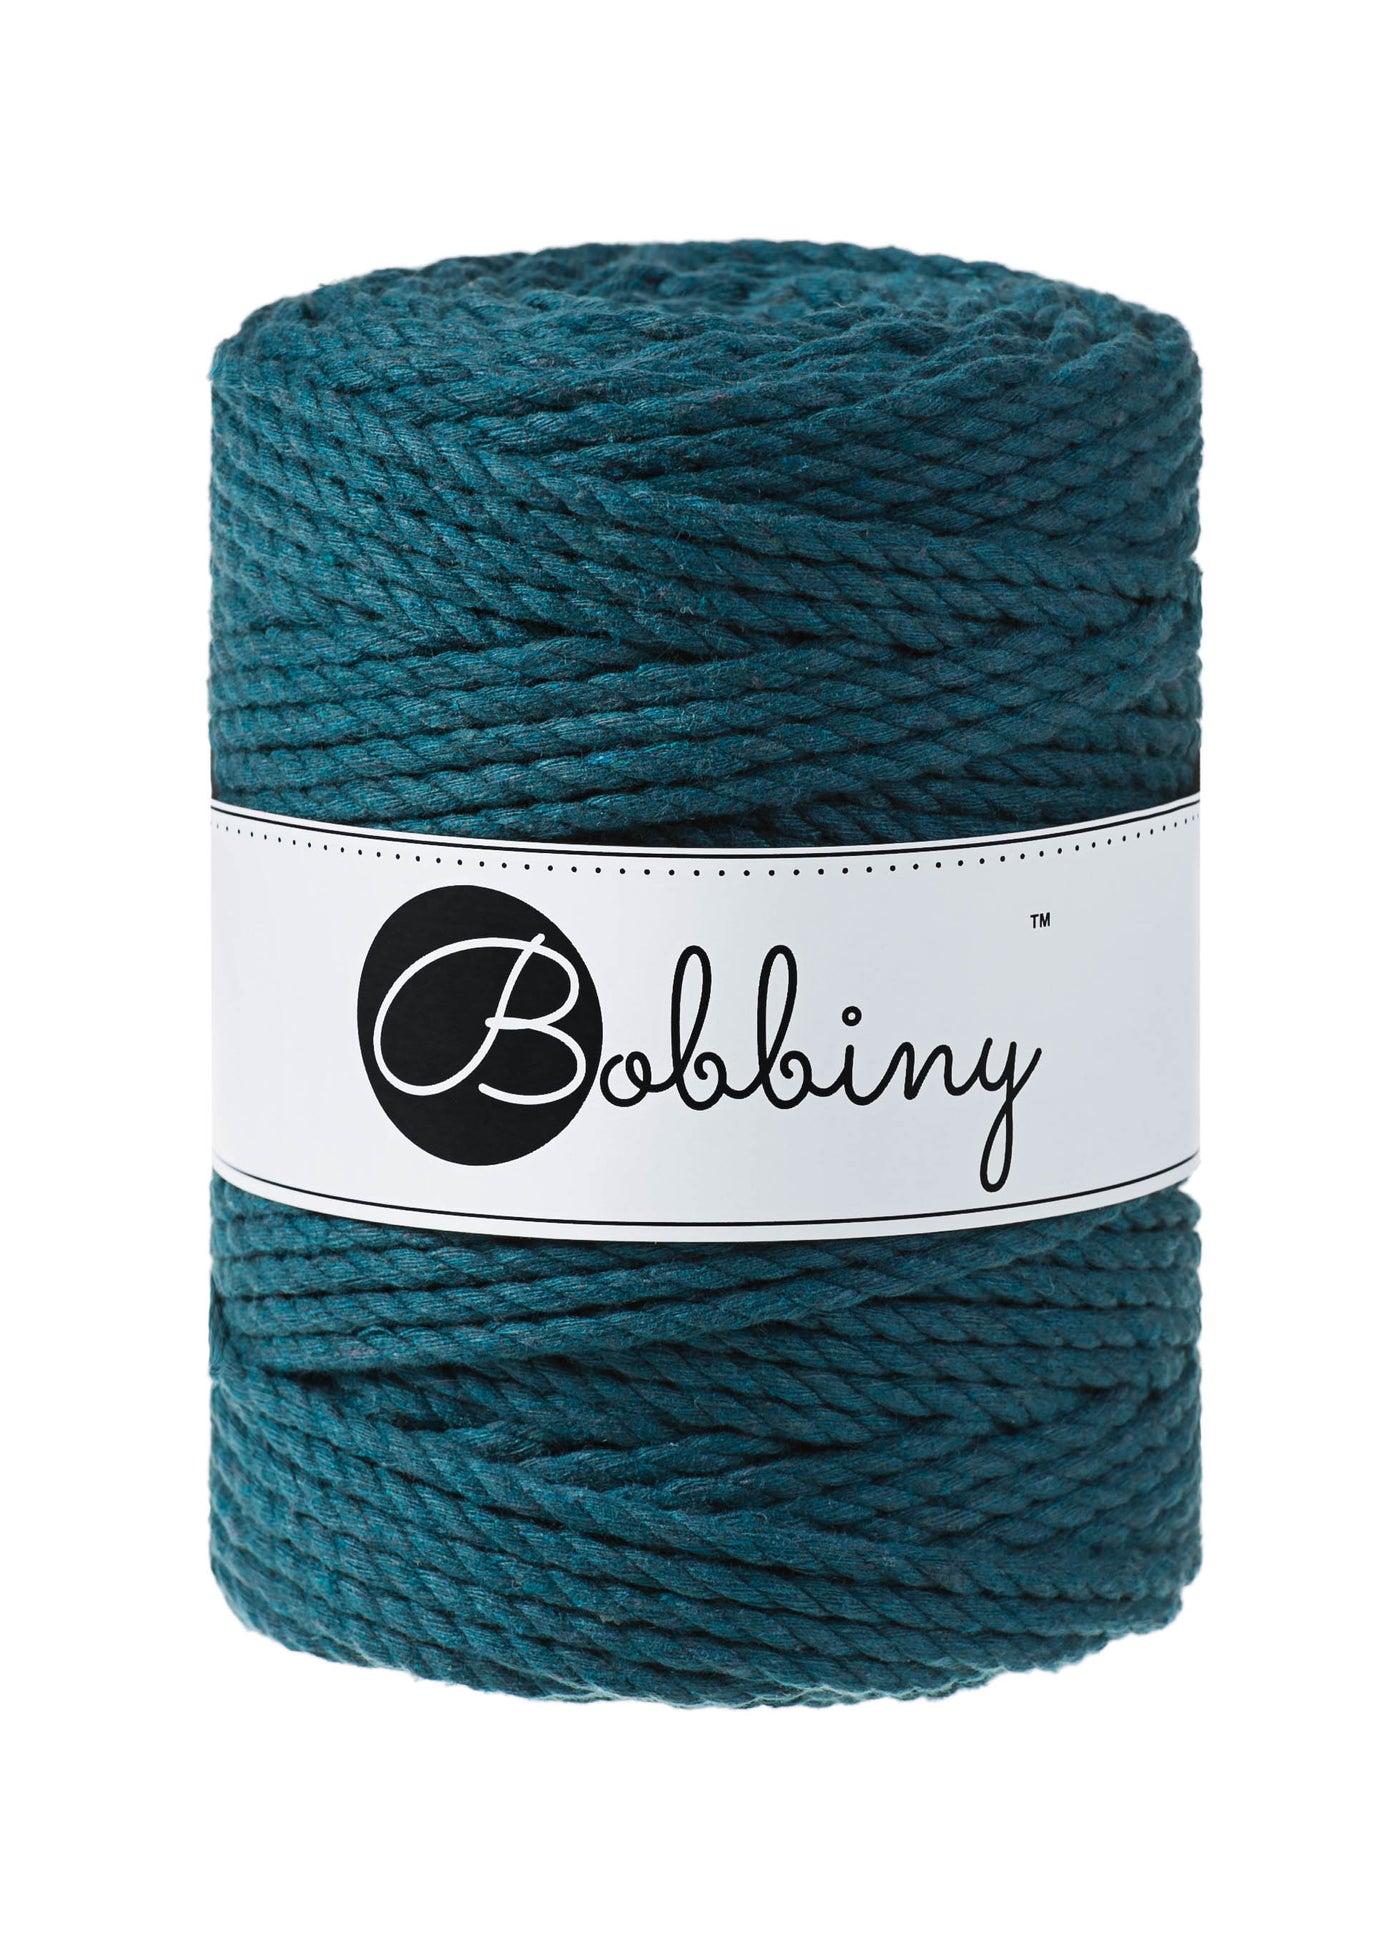 This superb new product from Bobbiny is the latest addition to their gorgeous range of products.  Made from 100% recycled cotton, it is perfect for Macrame projects due to its sturdiness. It contains no harmful dyes or chemicals and is OEKO-TEX certified.  This super soft triple twist rope also makes the most spectacular fringes and tassels.  Length: 100m (108 Yards)  Weight: 800gms  Contains 120 Fibres ( 3x40 )  Also available in 3mmj